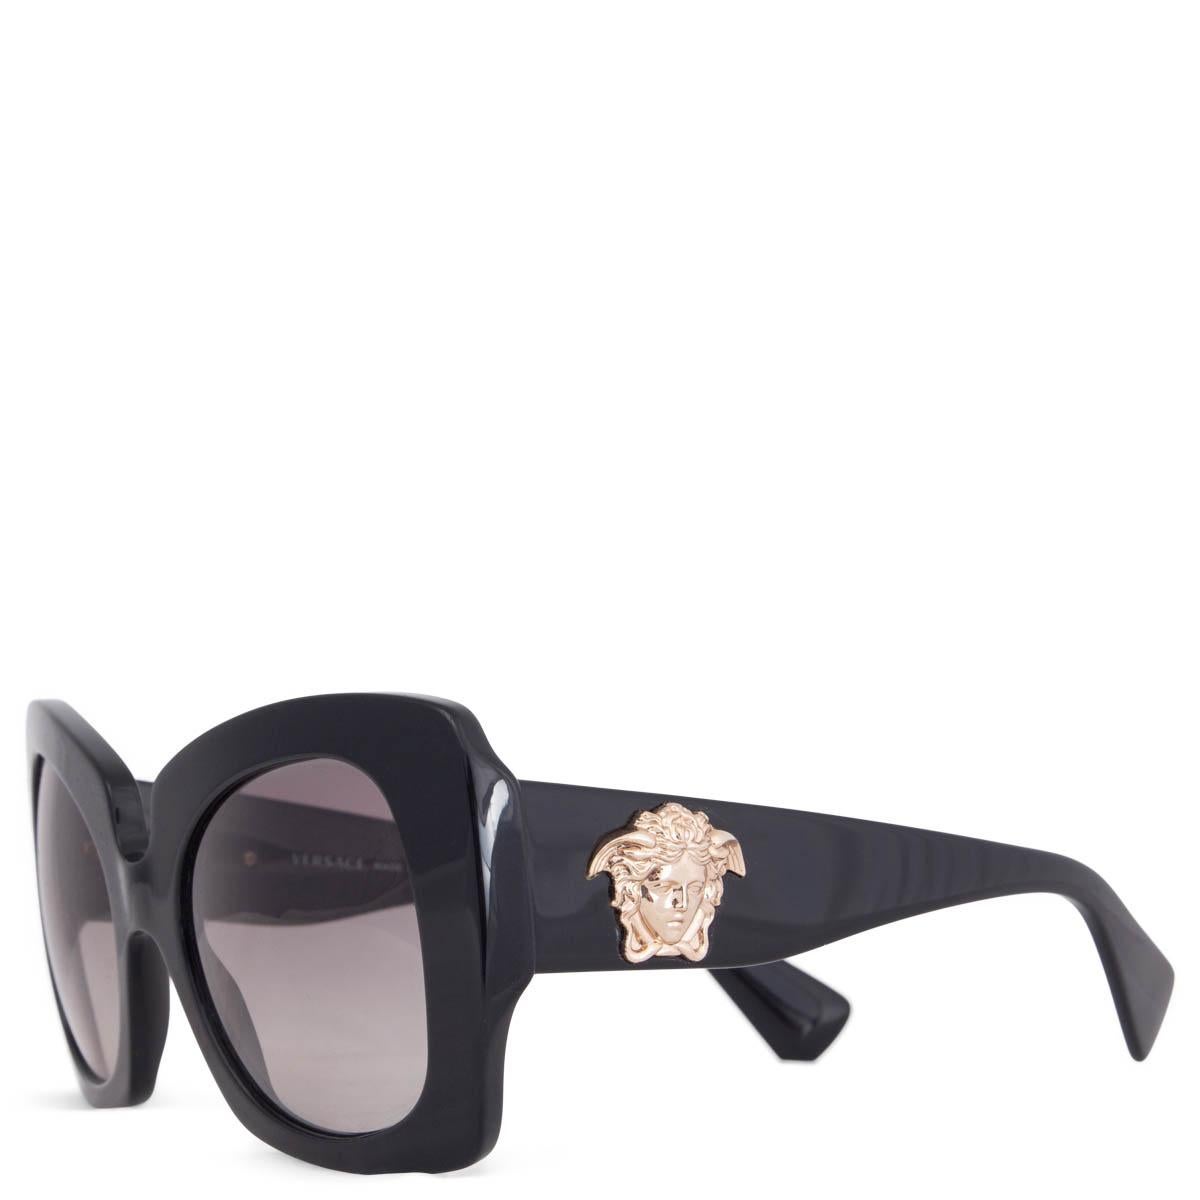 100% authentic Versace Medusa 4308 GB1/11 butterfly sunglasses in black acetate with silver-tone Medusa on the side and light grey lenses. Have been worn and are in excellent condition. Come with case. 

Measurements
Model	4308 GB1/11
Width	15cm